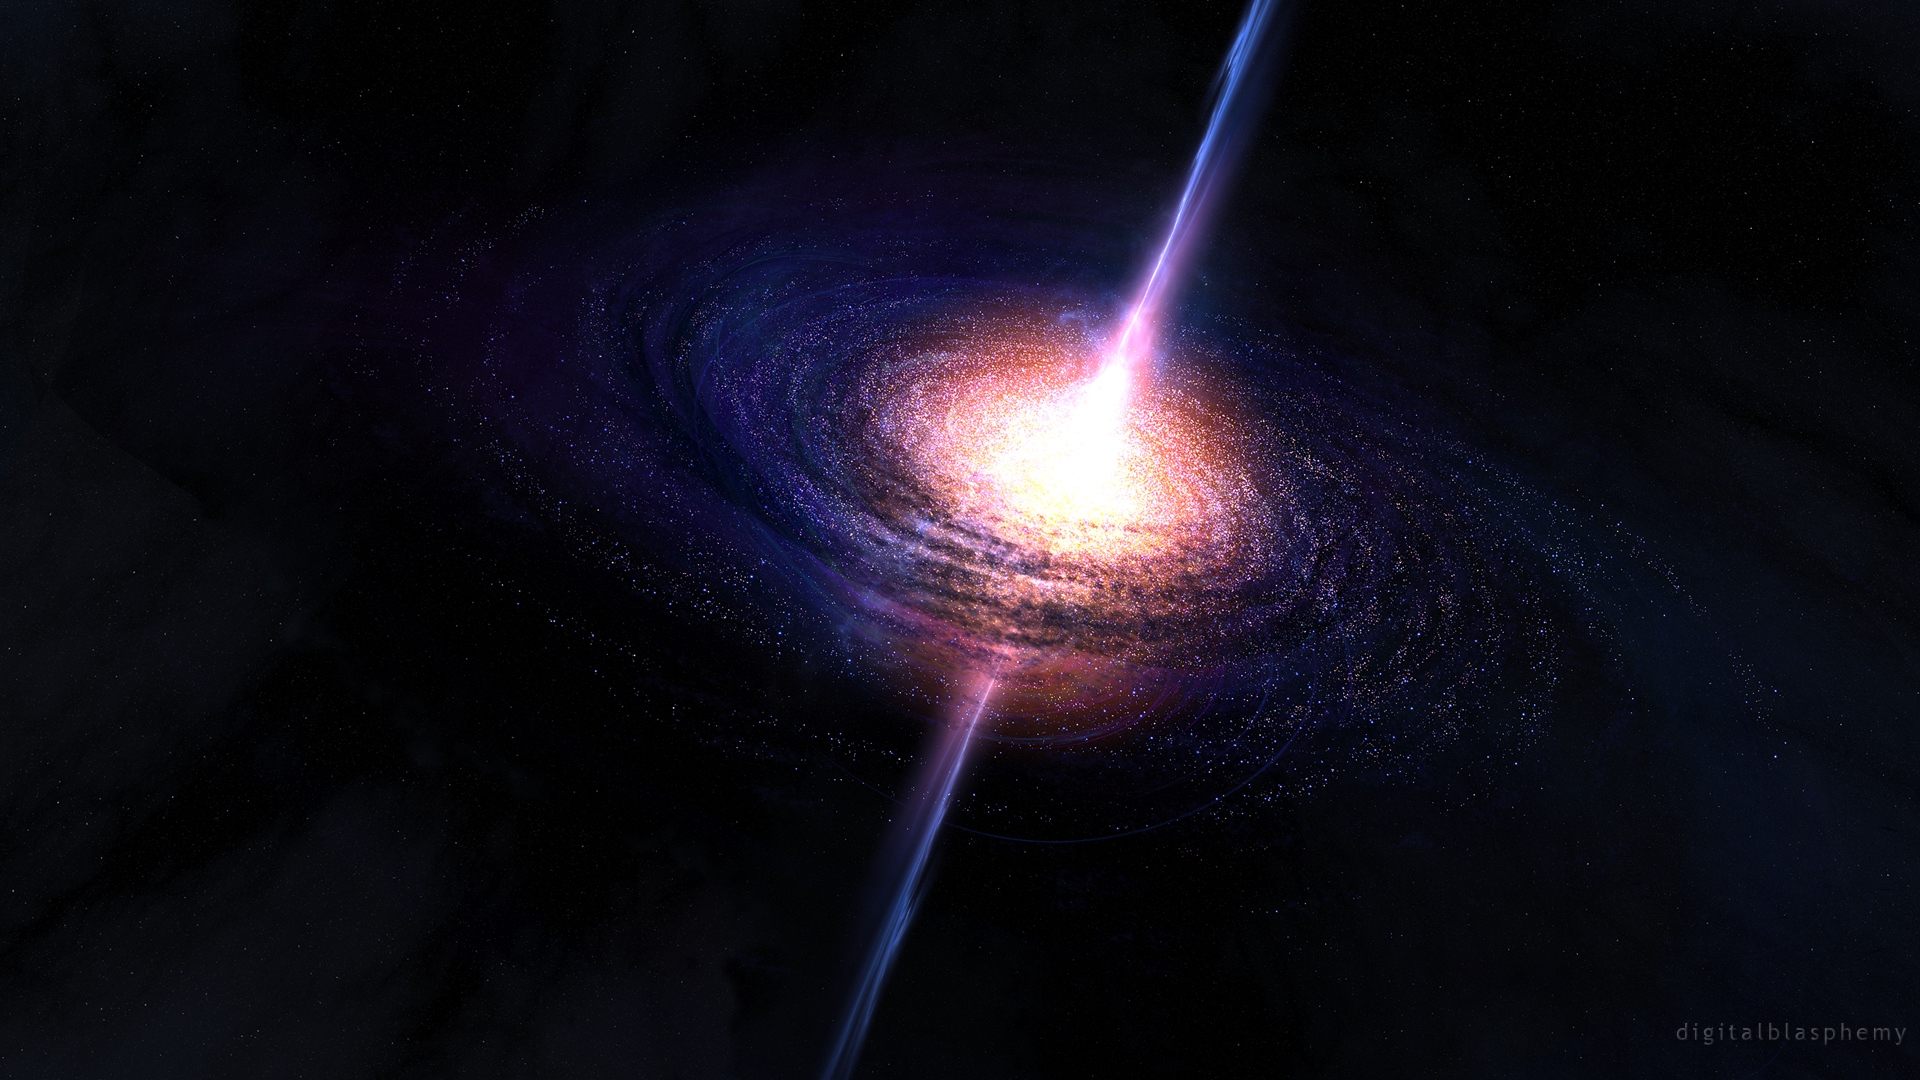 Interstellar Black Hole Wallpaper Pics About Space